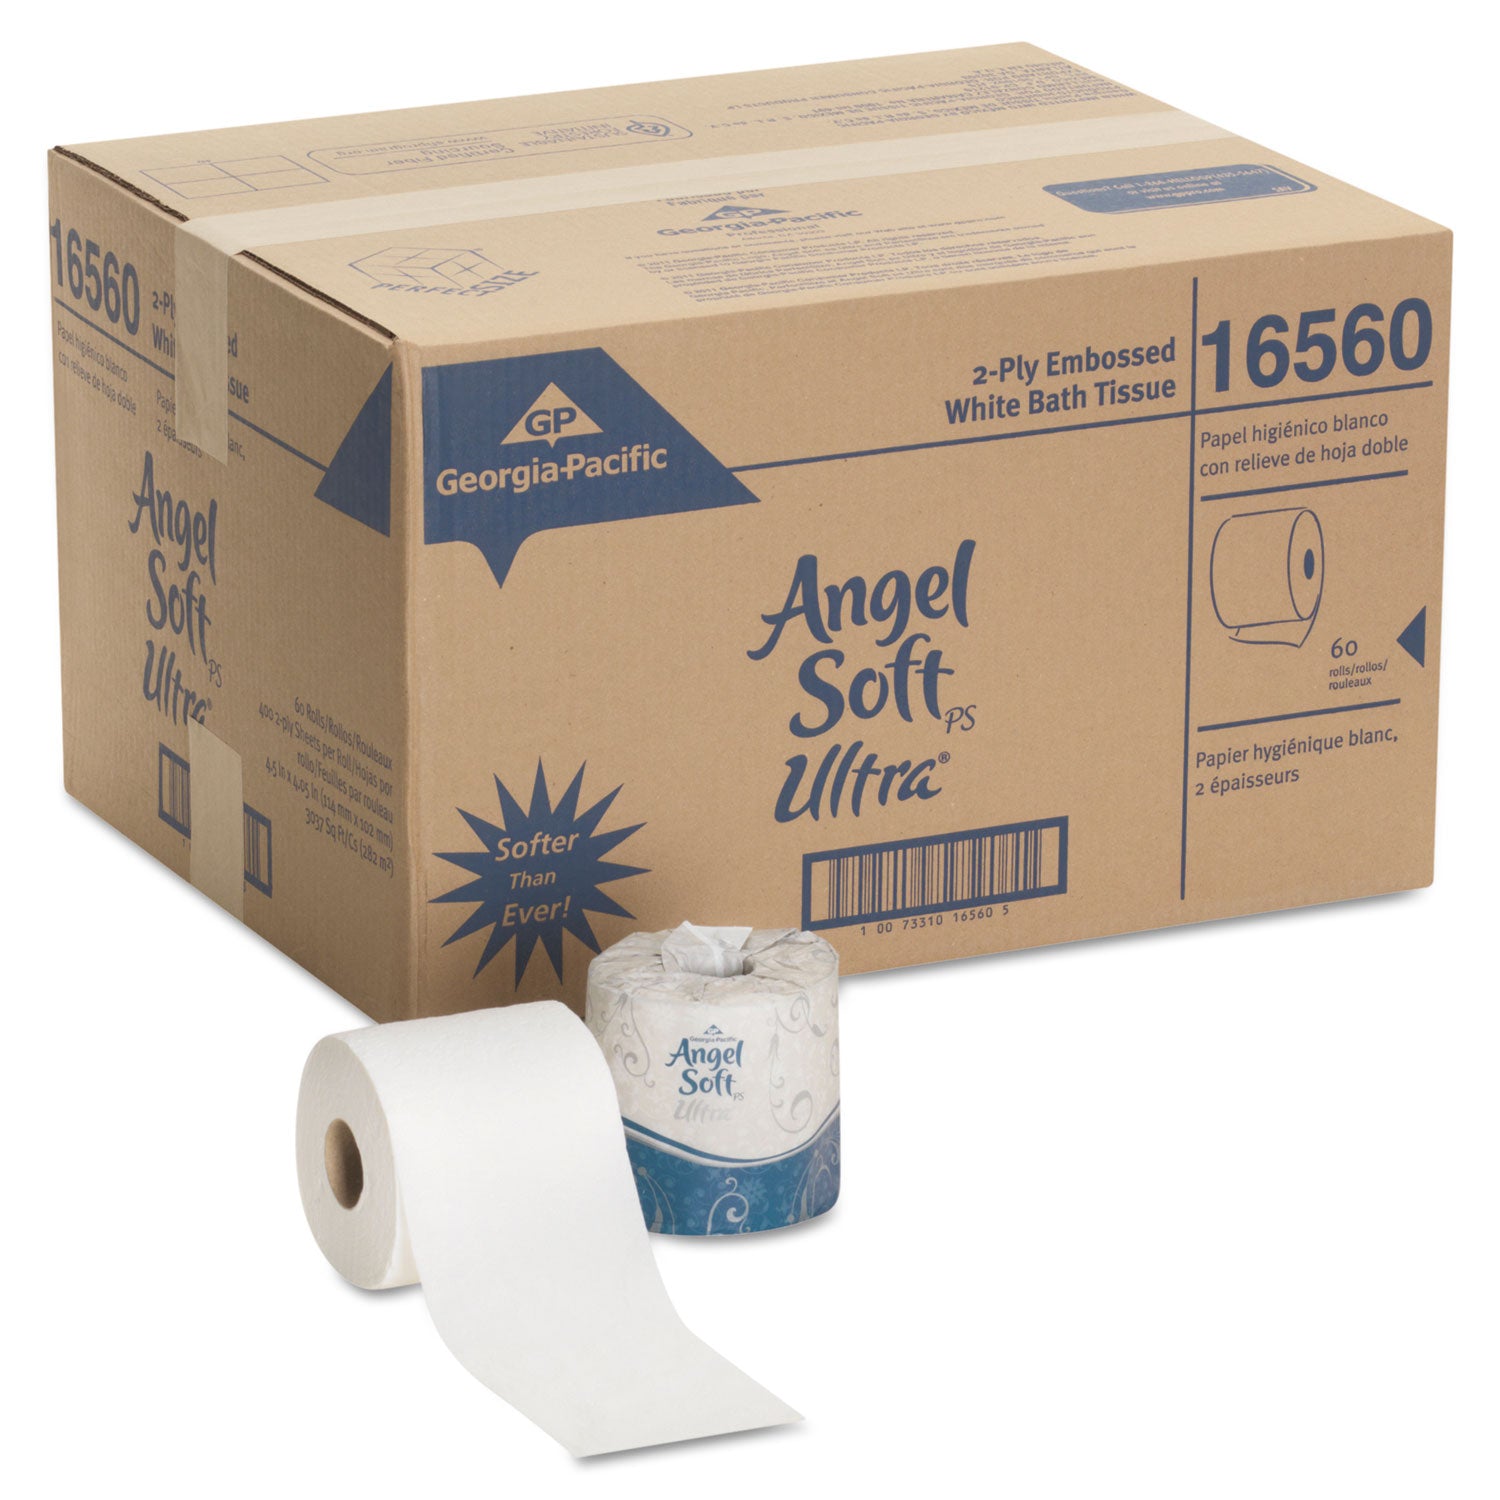 Angel Soft ps Ultra 2-Ply Premium Bathroom Tissue, Septic Safe, White, 400 Sheets/Roll, 60/Carton - 